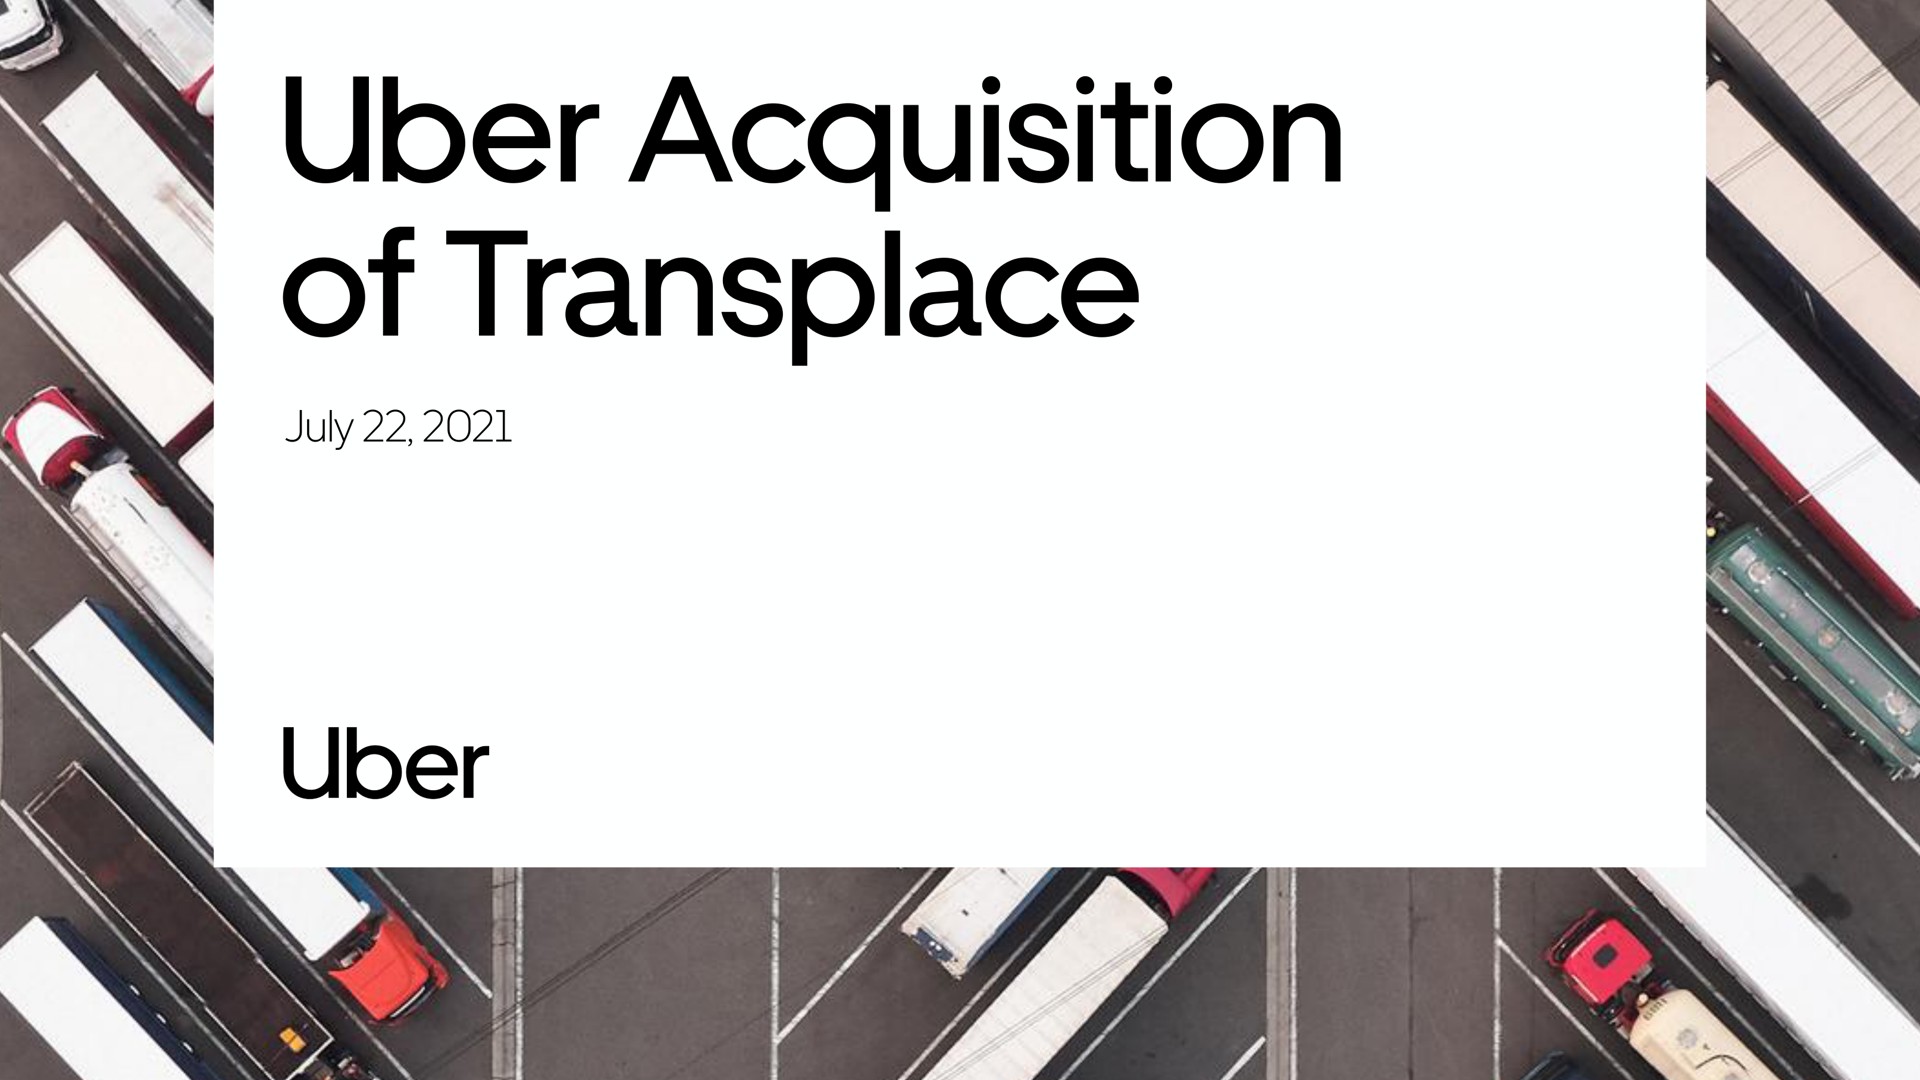 acquisition global of transplace all hands | Uber